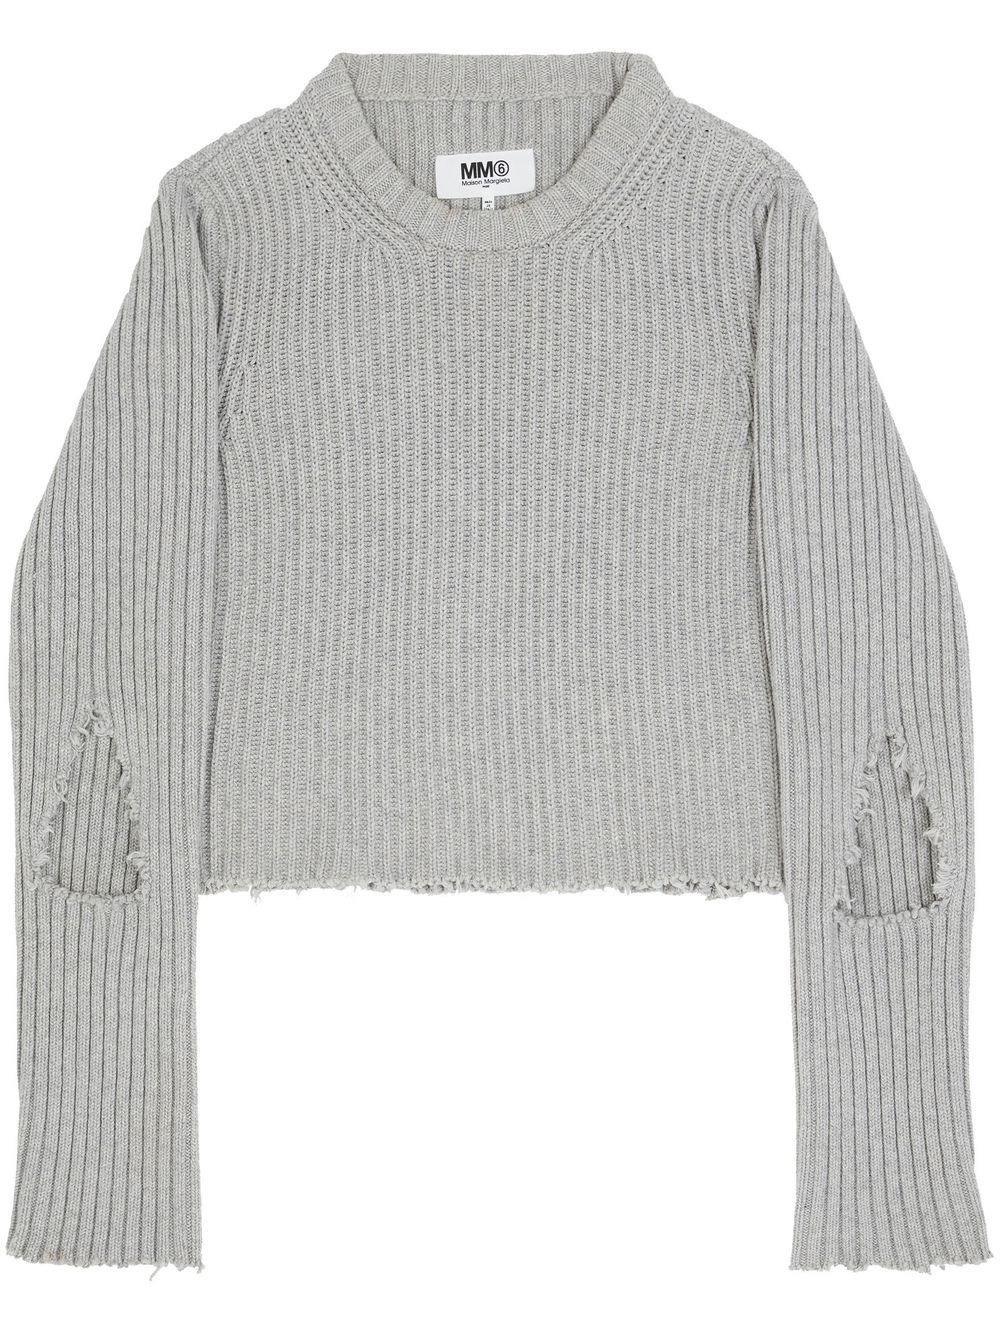 MM6 MAISON MARGIELA RIBBED KNIT SWEATER WITH RIPPED DETAILS